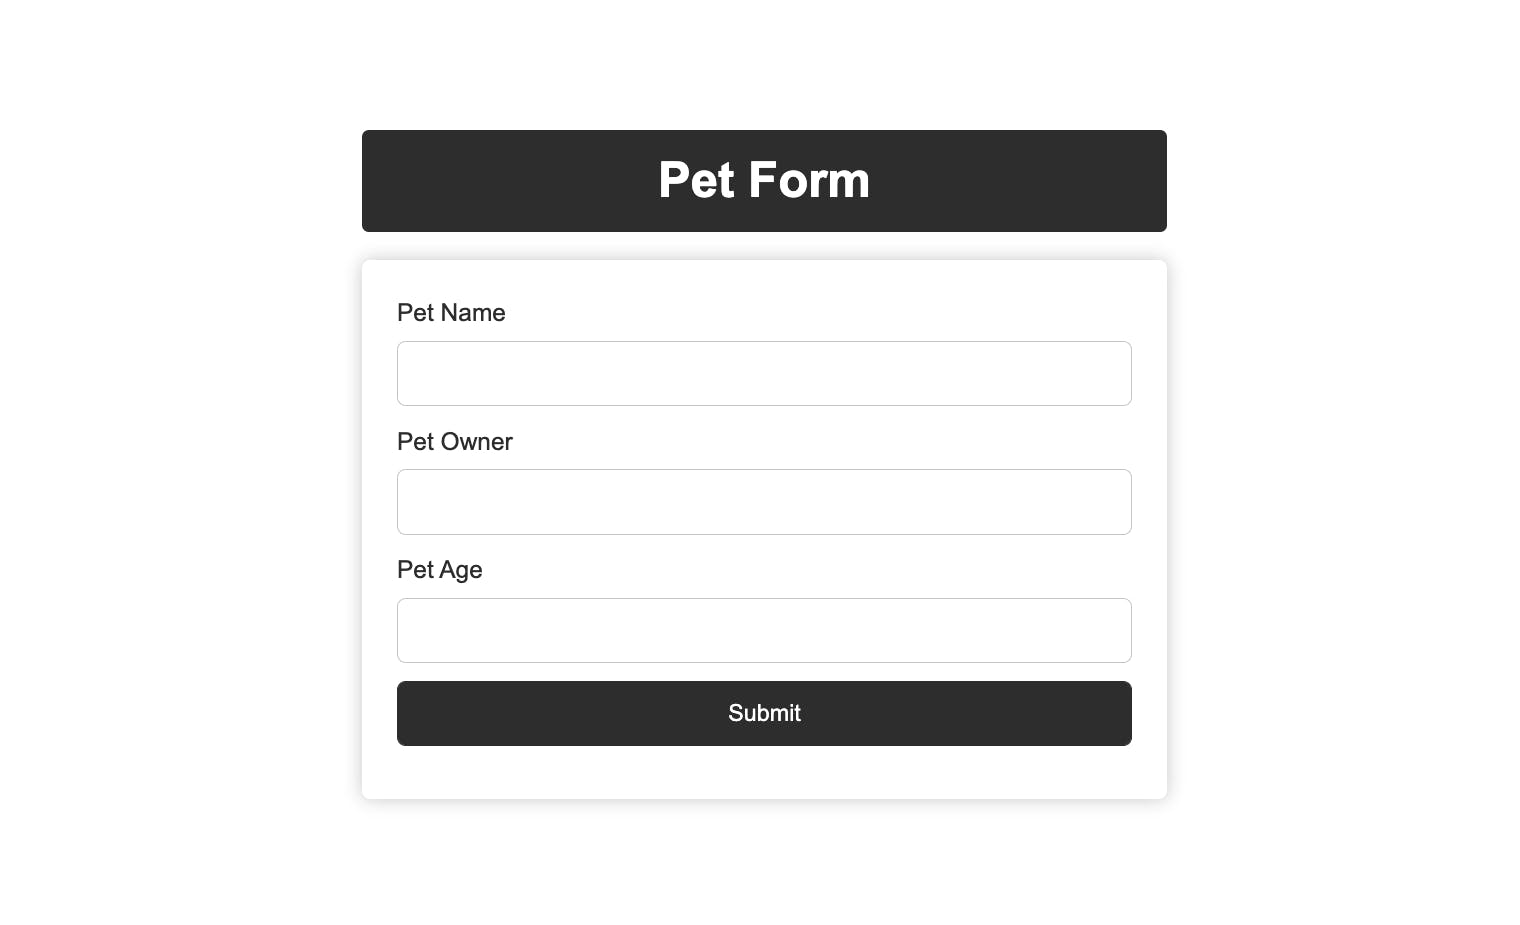 The output of the pet form section code